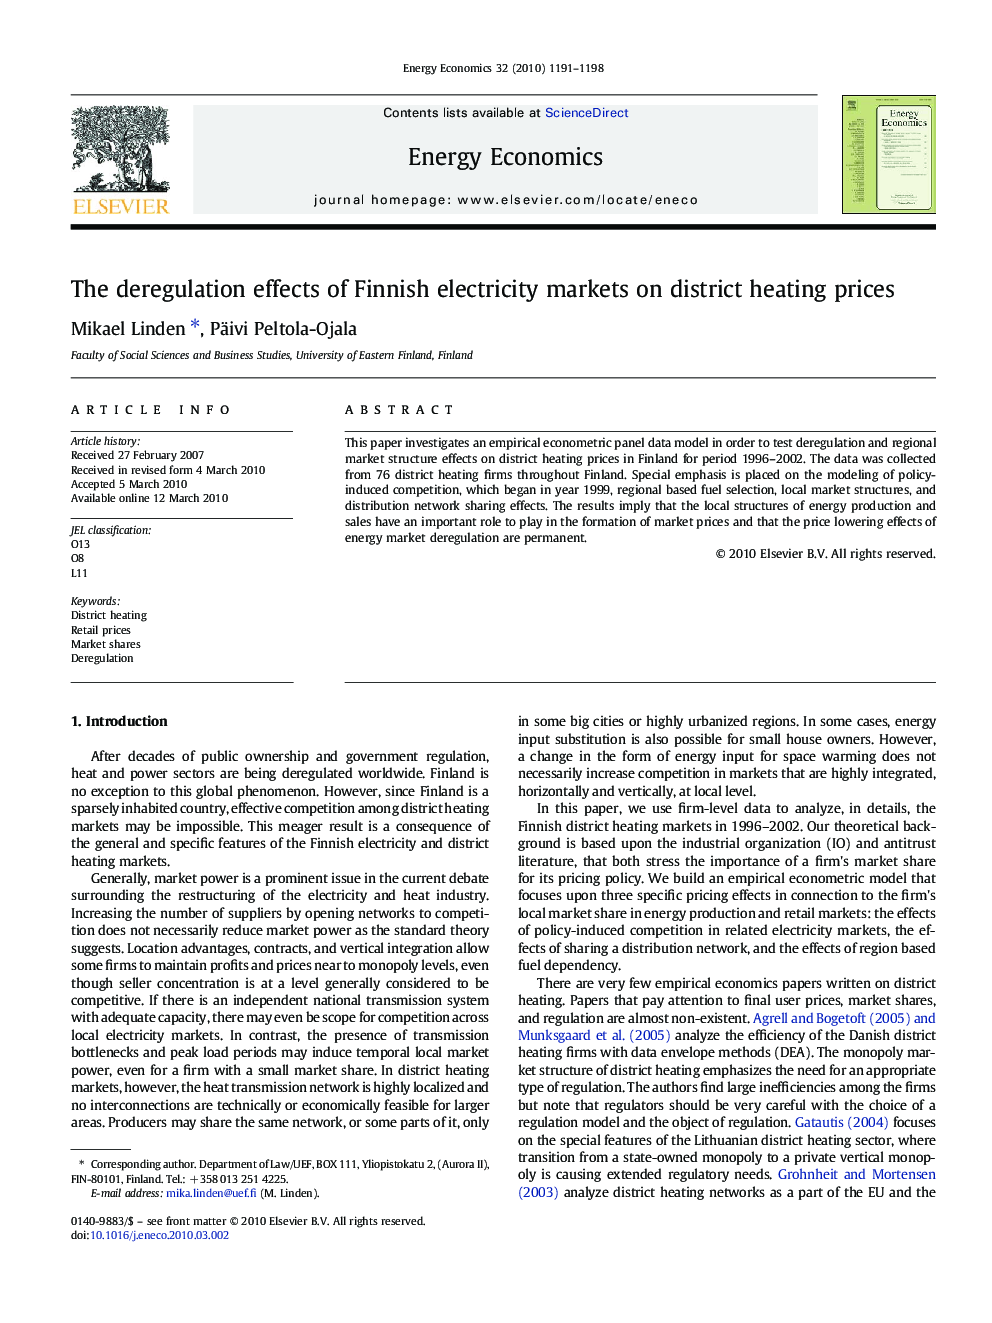 The deregulation effects of Finnish electricity markets on district heating prices